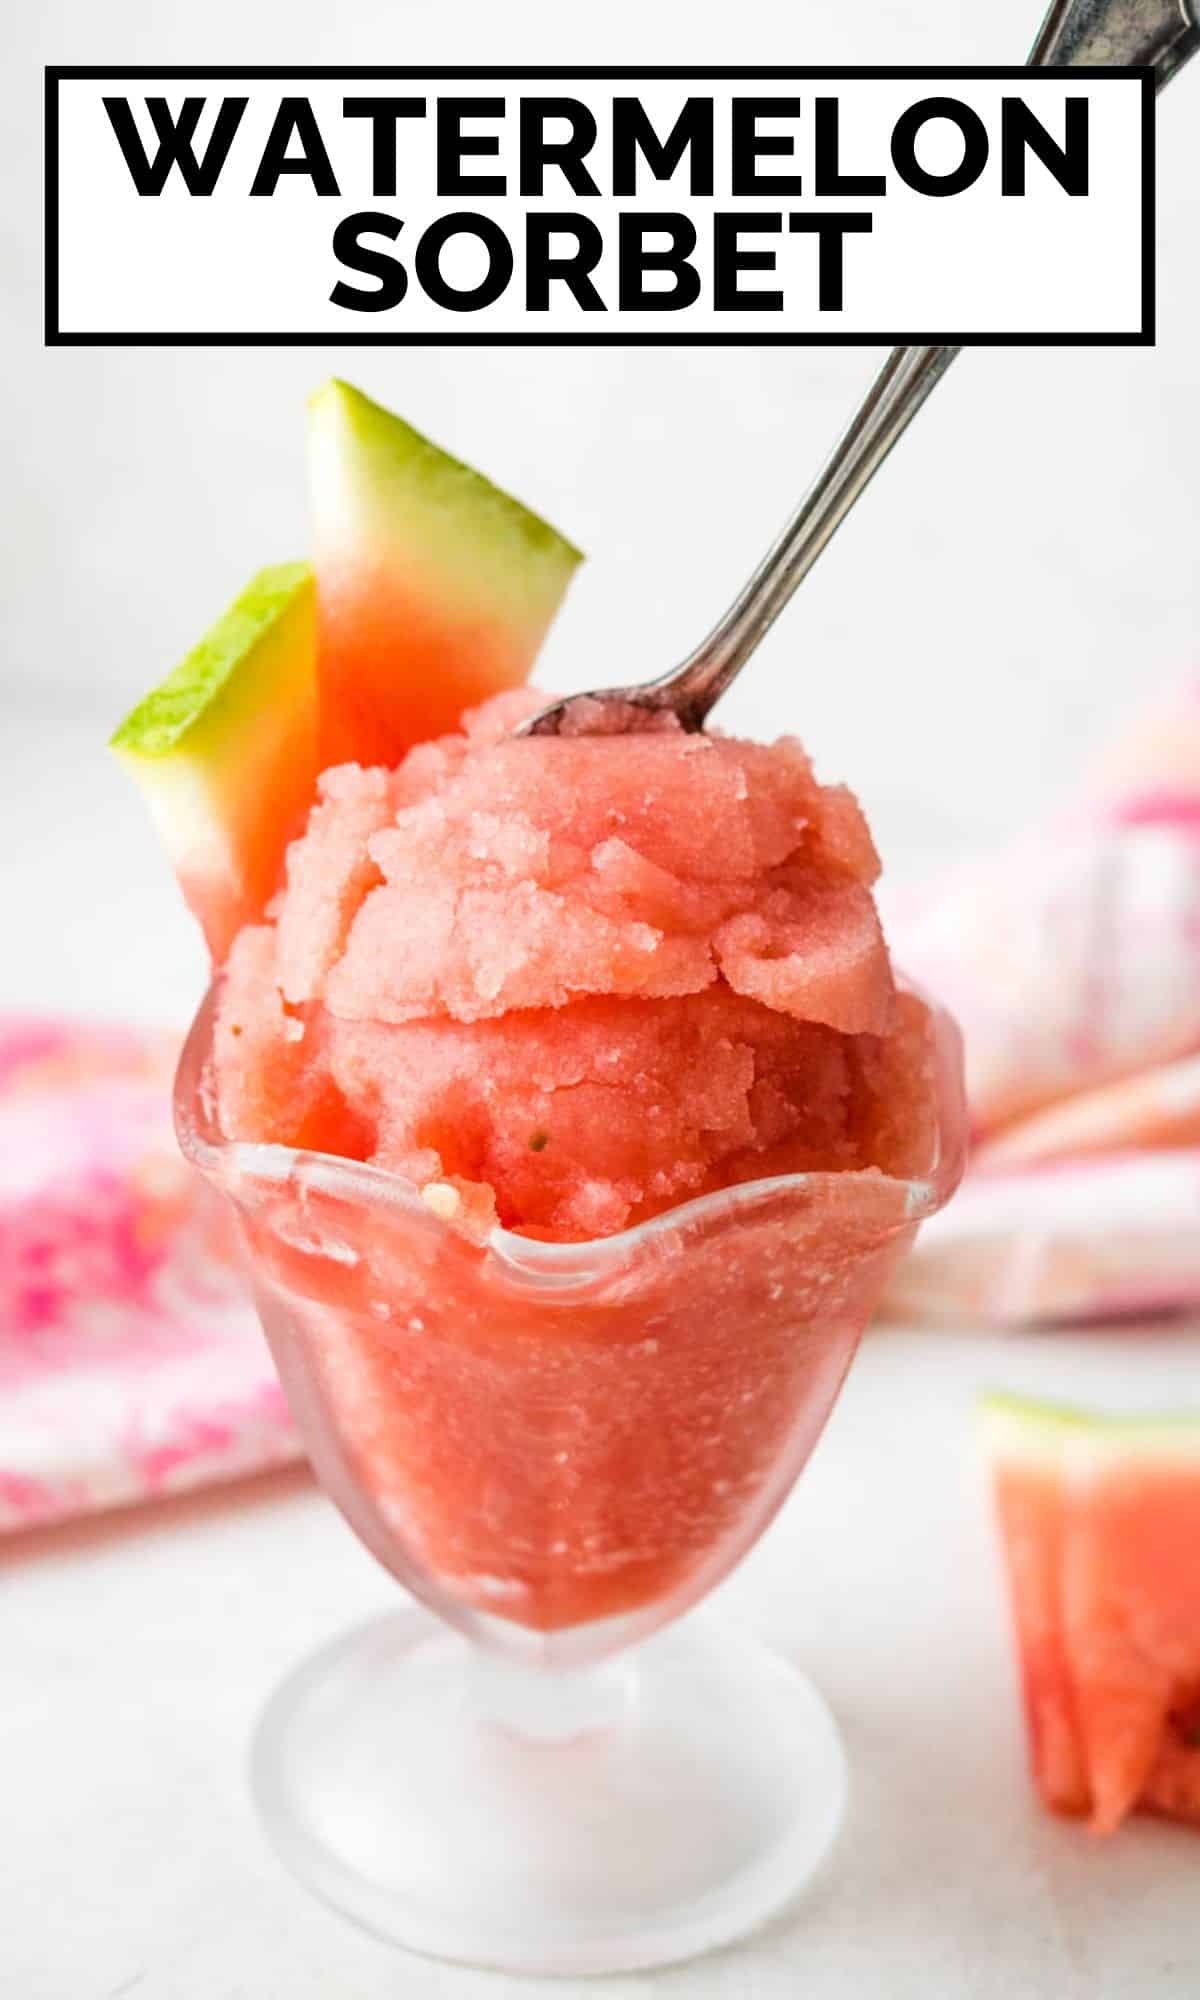 A dish of watermelon sorbet with a spoon and slice of fresh fruit.